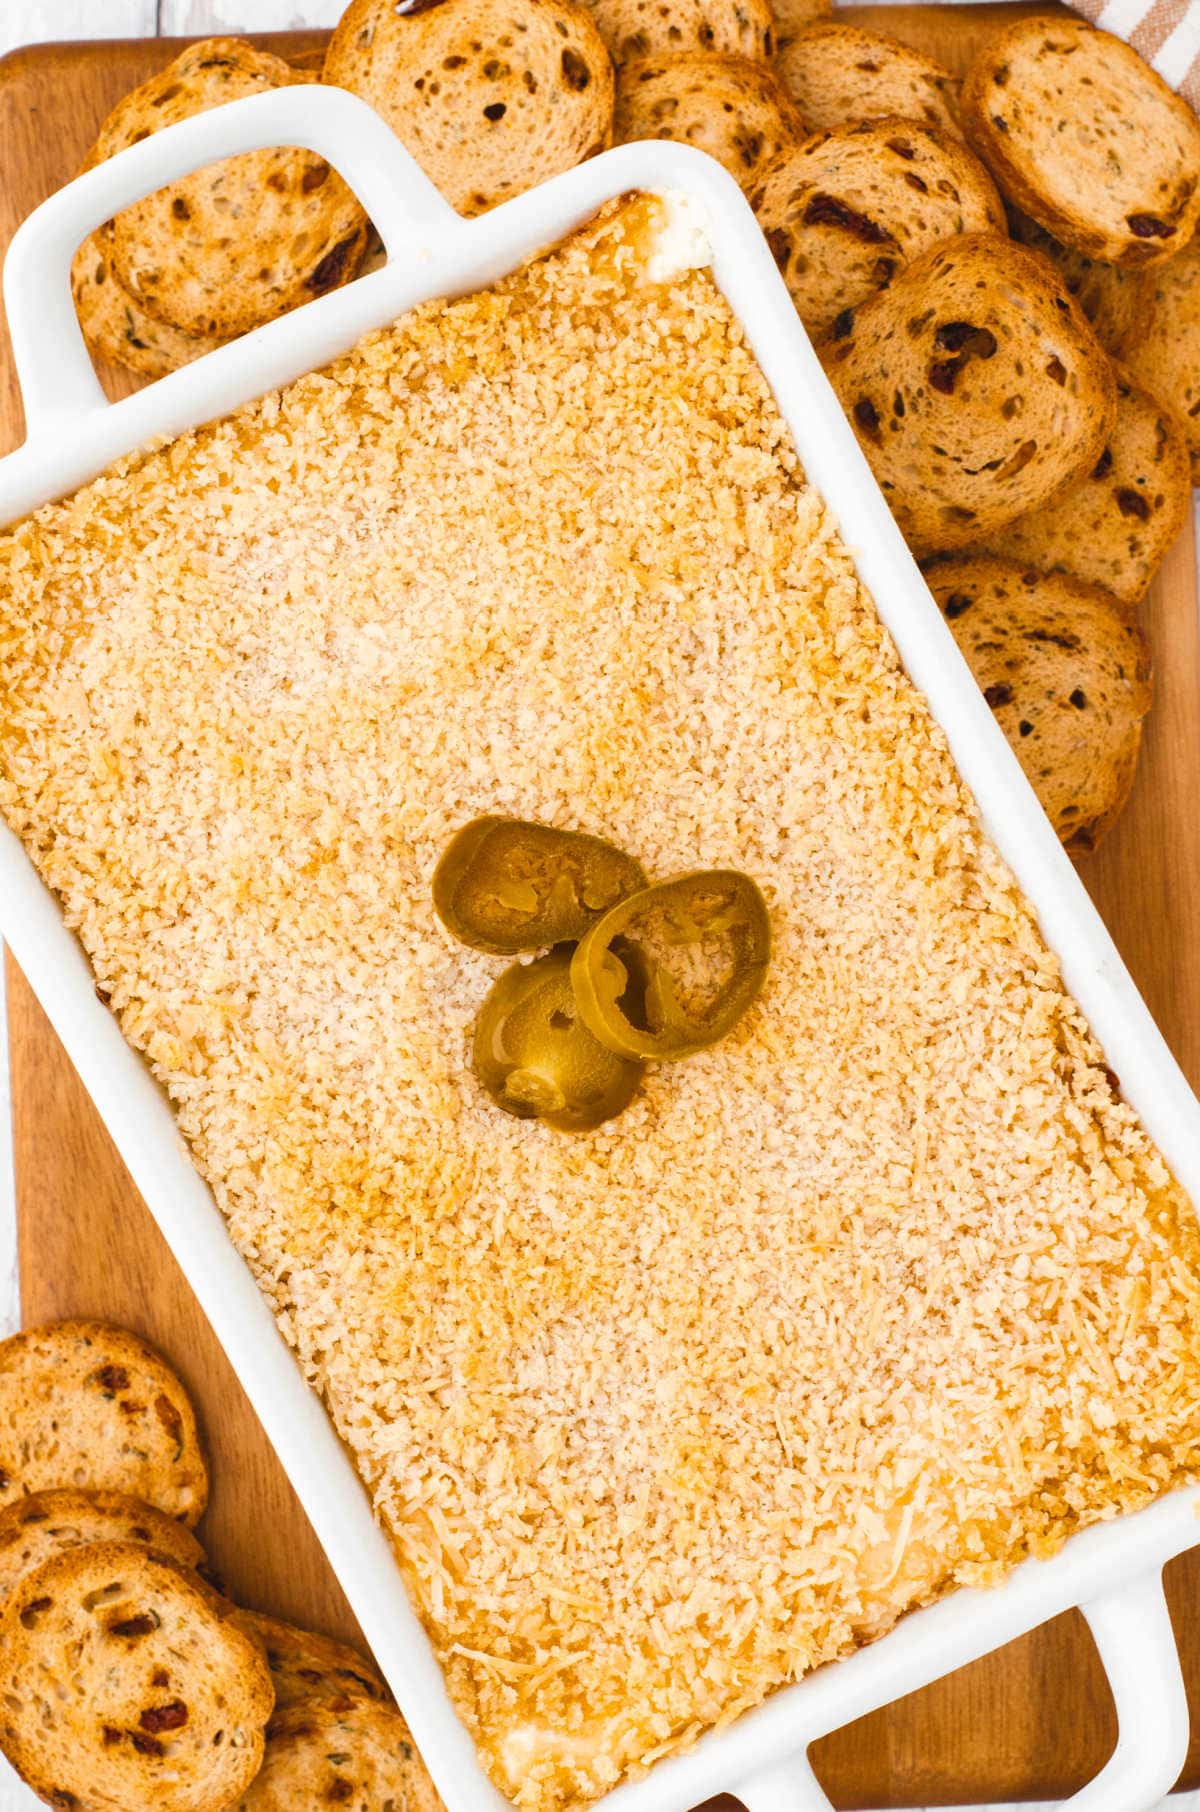 A finished pan of jalapeno cream cheese dip with crackers around it.